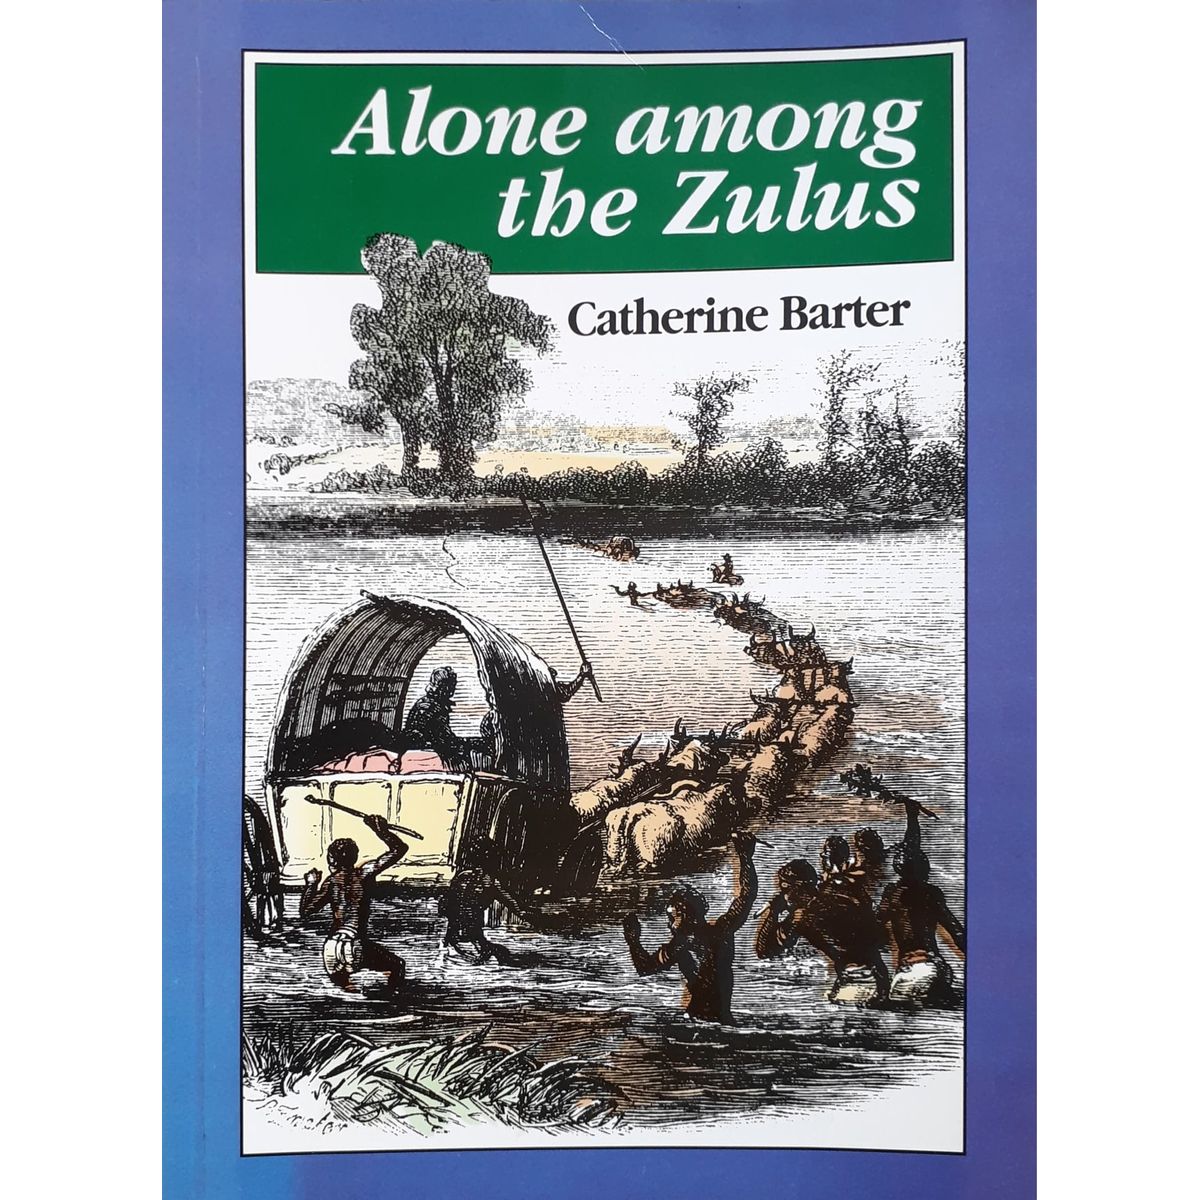 ISBN: 9780869809143 / 0869809148 - Alone Among the Zulus by Catherine Barter [1995]